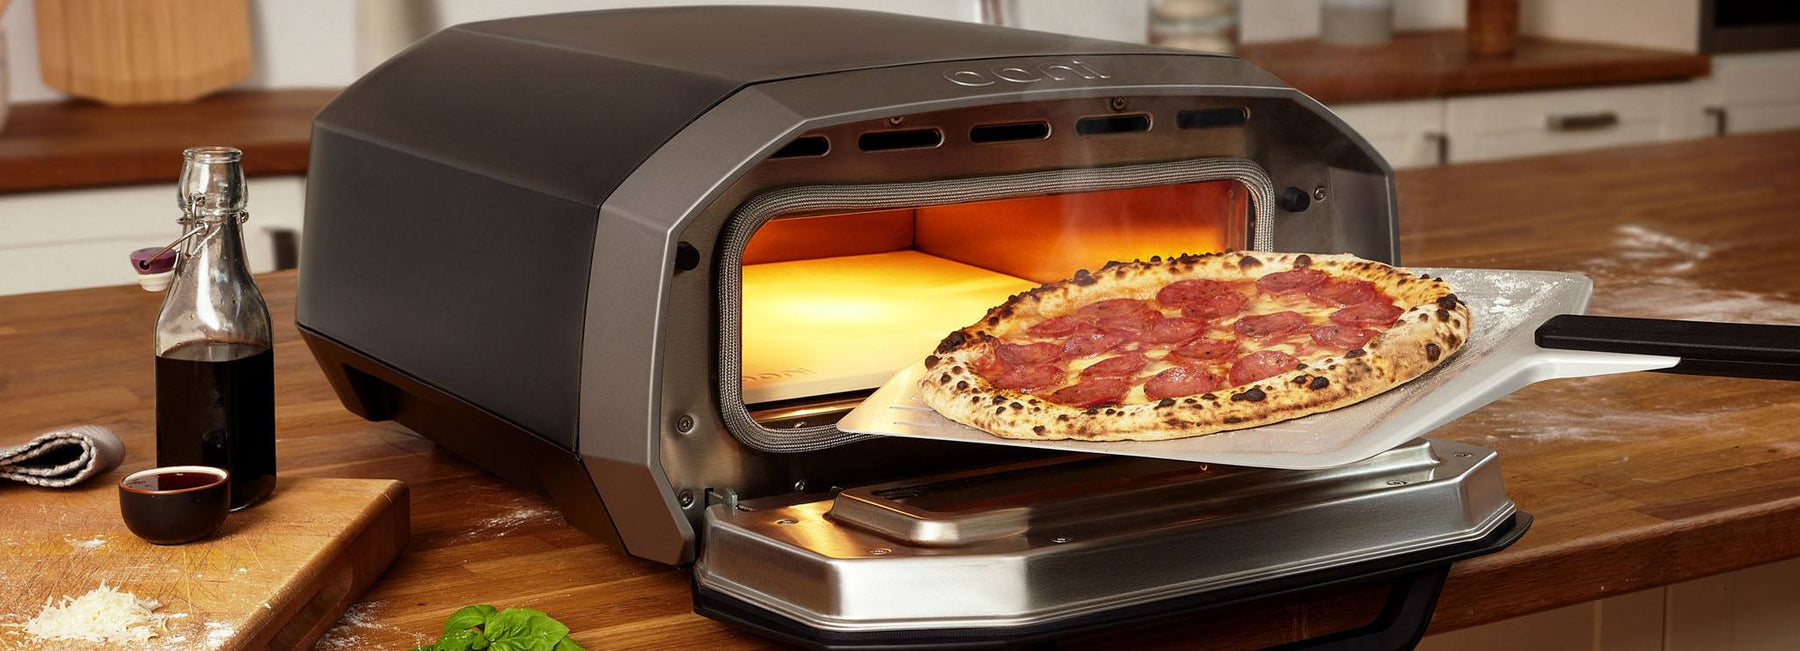 Meet Ooni Volt 12 : your all-electric indoor and outdoor pizza oven